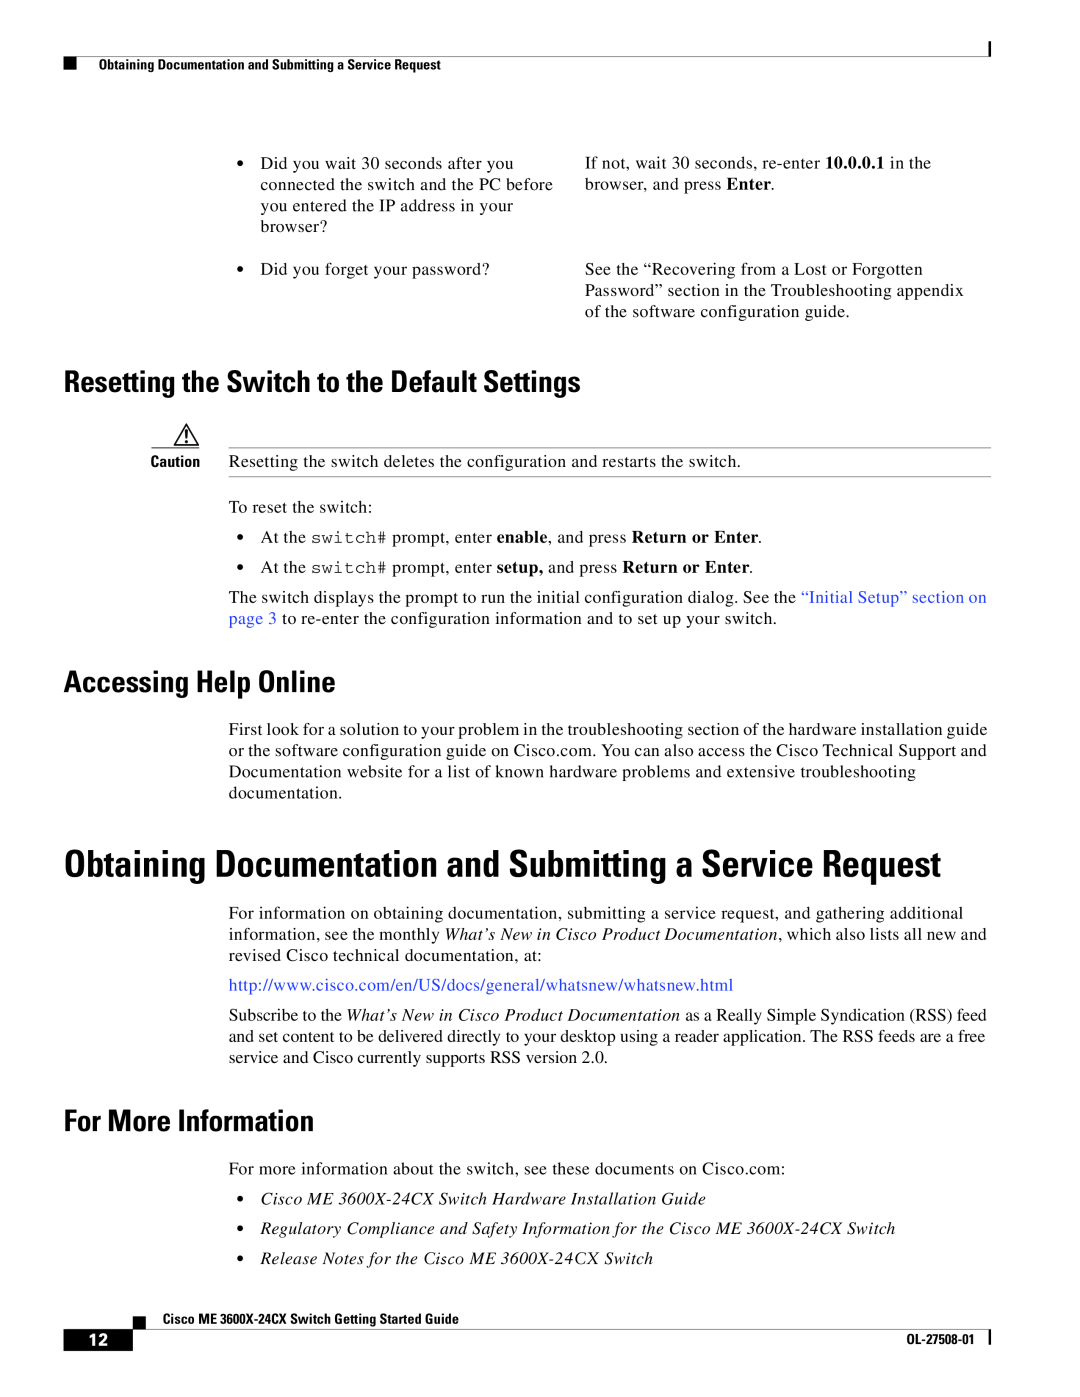 Cisco Systems ME3600X24FSM manual Resetting the Switch to the Default Settings, Accessing Help Online, For More Information 